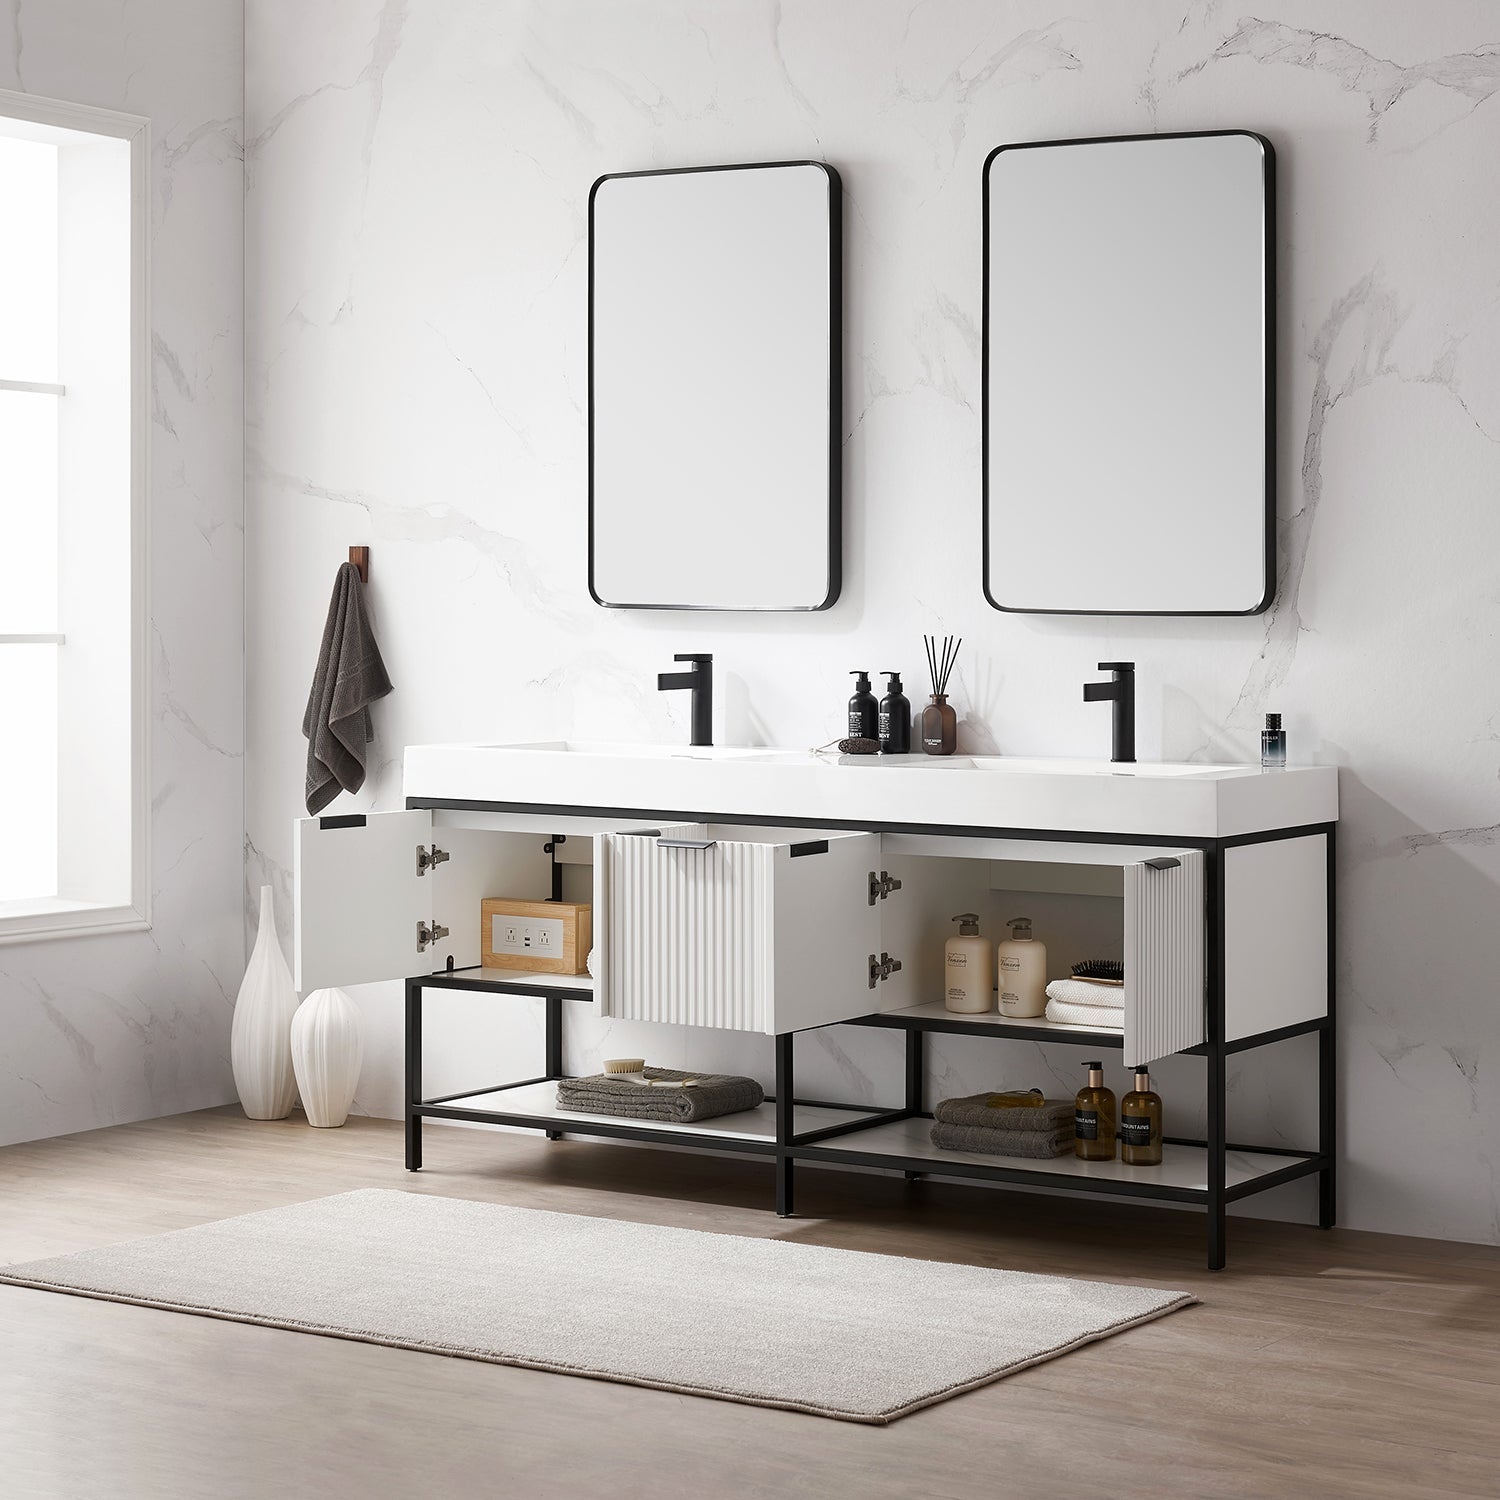 Vinnova Design Marcilla 72" Double Sink Bath Vanity in White with One Piece Composite Stone Sink Top - New Star Living